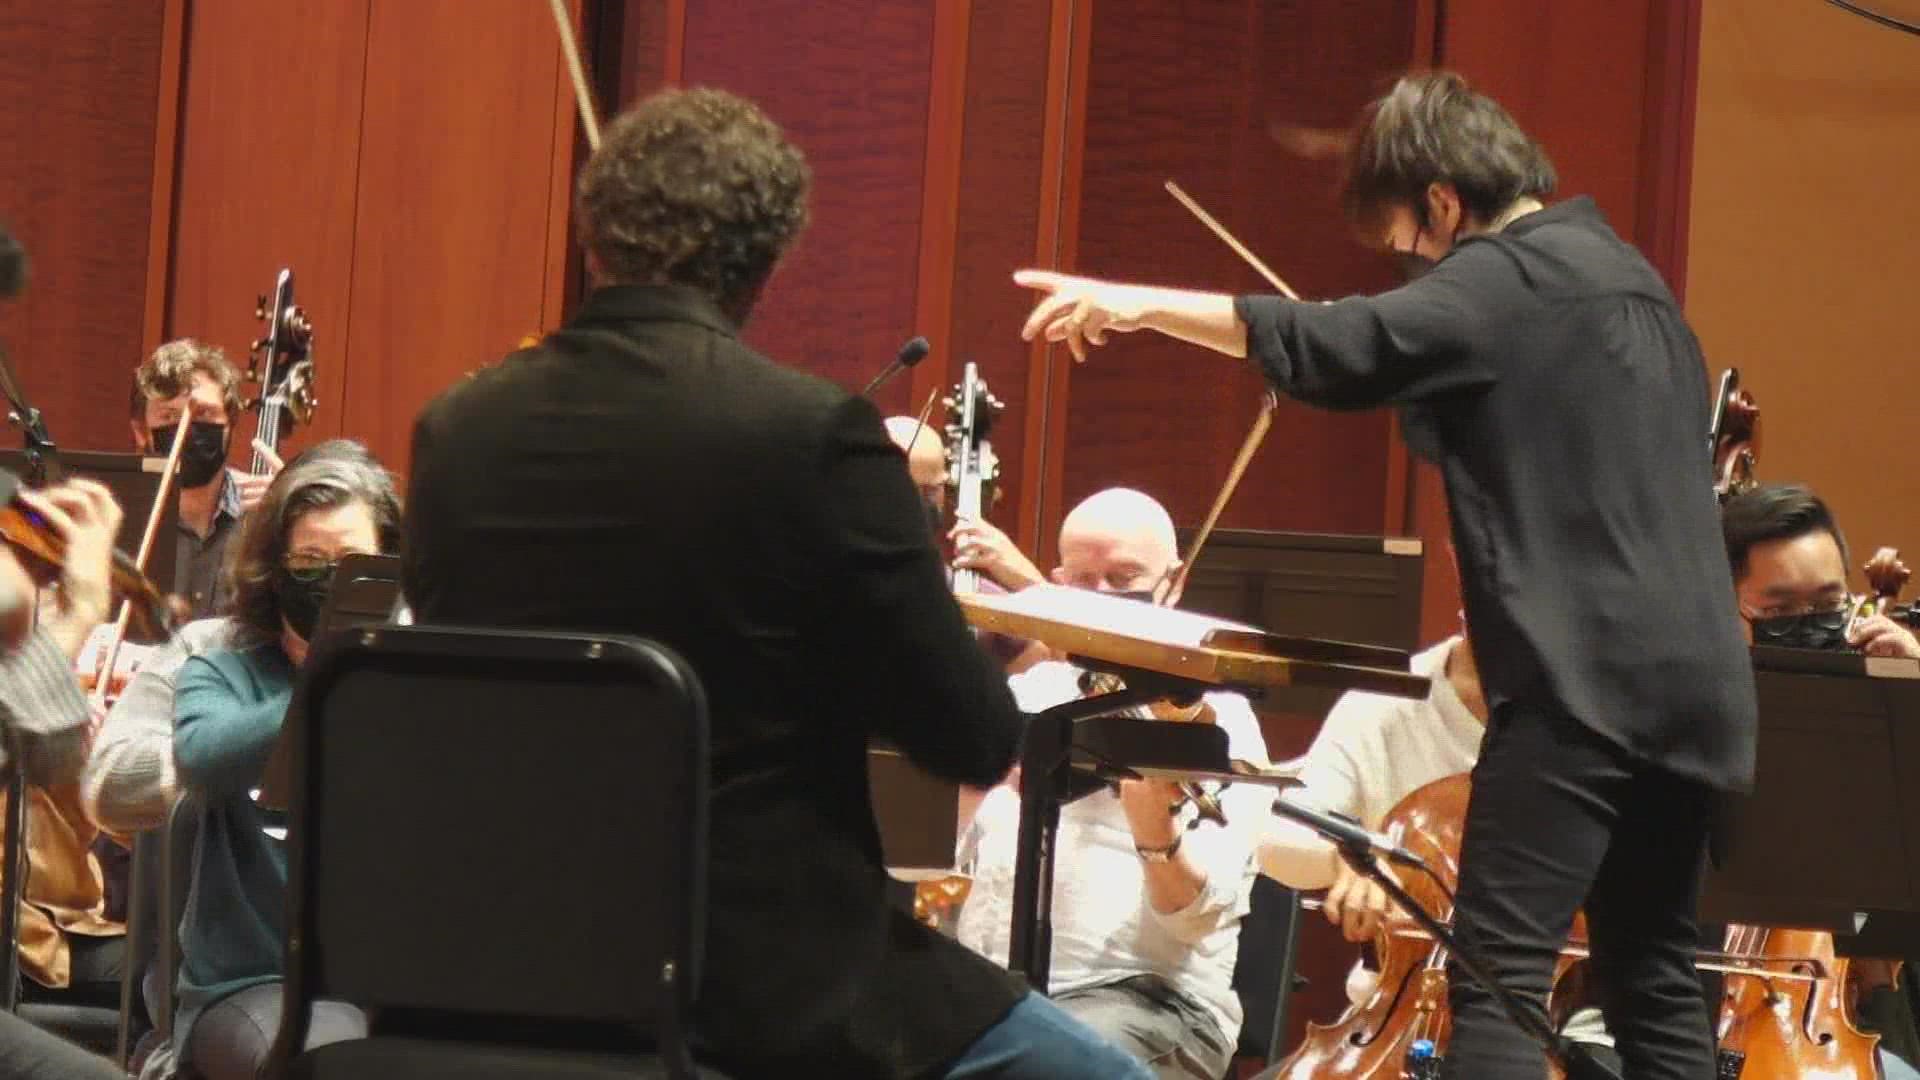 The Seattle Symphony will host a free concert for the public starting Sunday at 2 p.m. at Benaroya Hall.